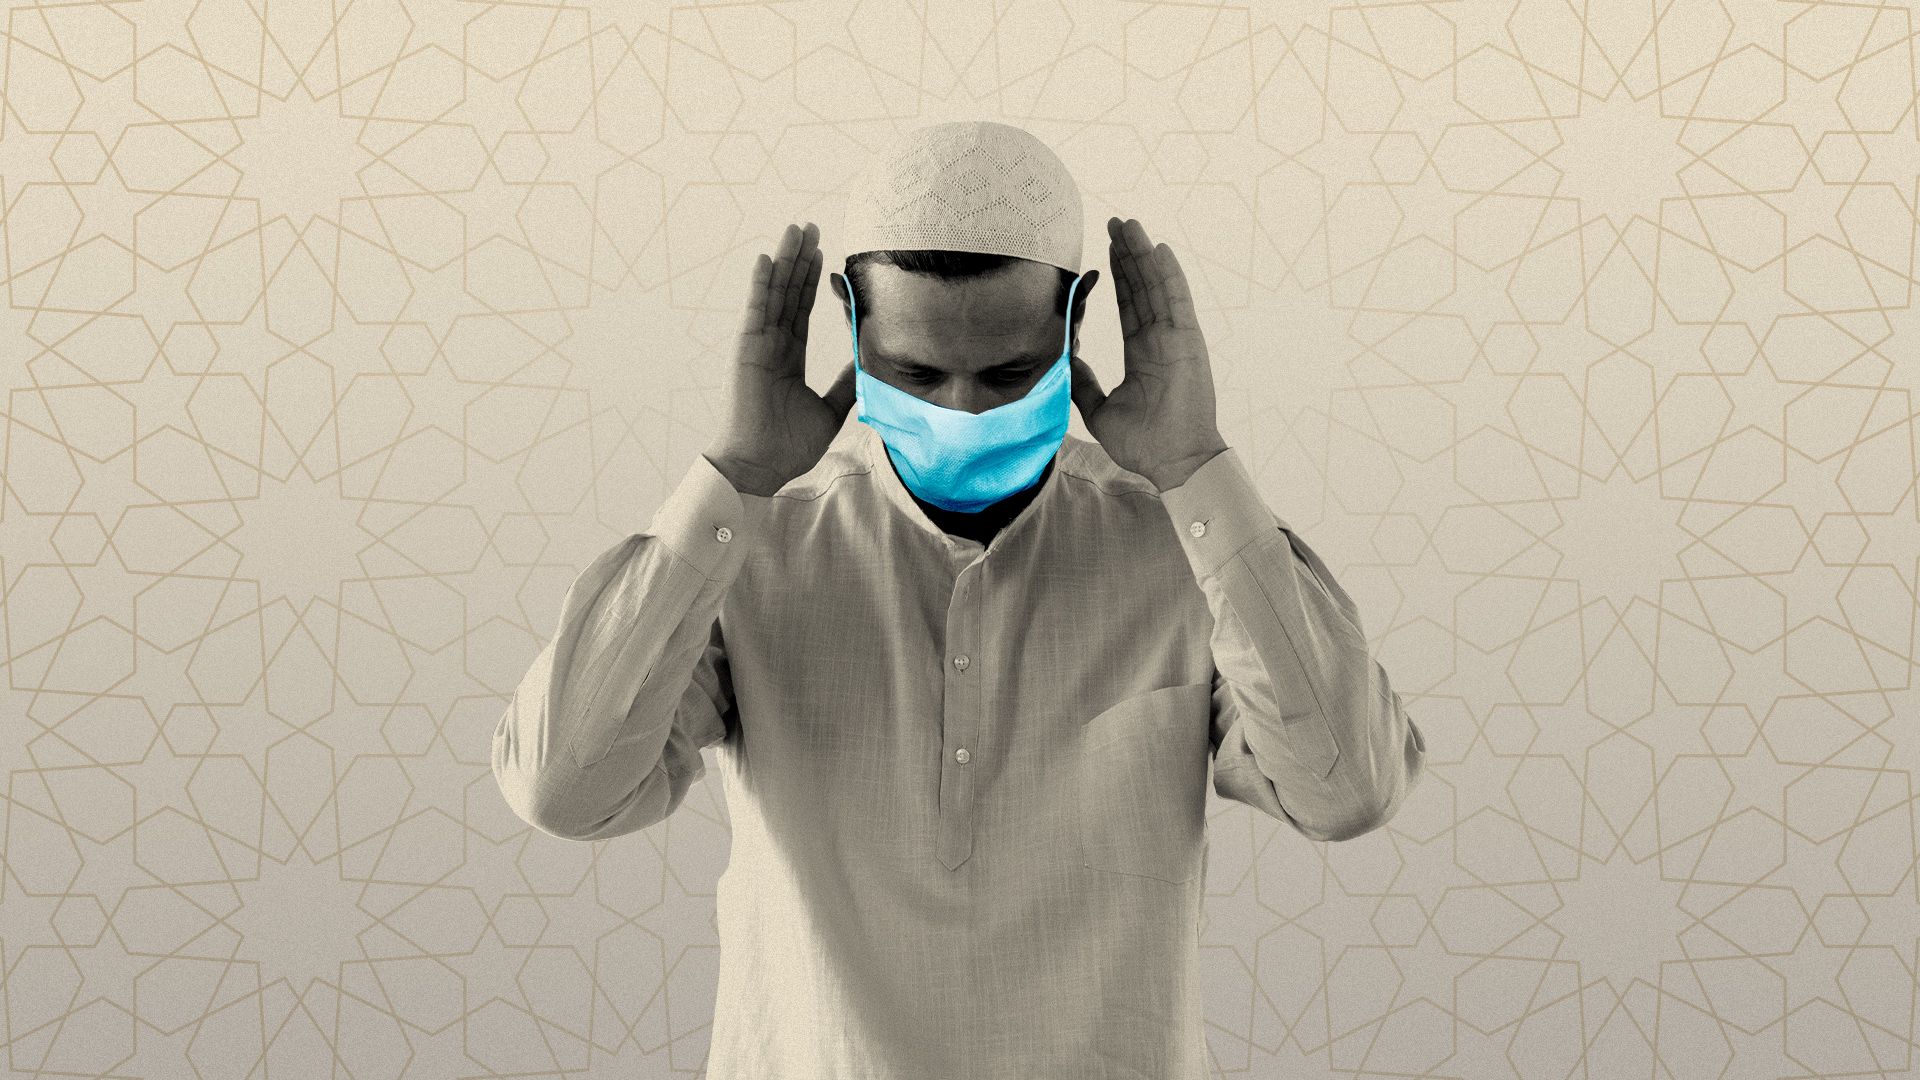 Illustration of a man praying with a surgical mask on.